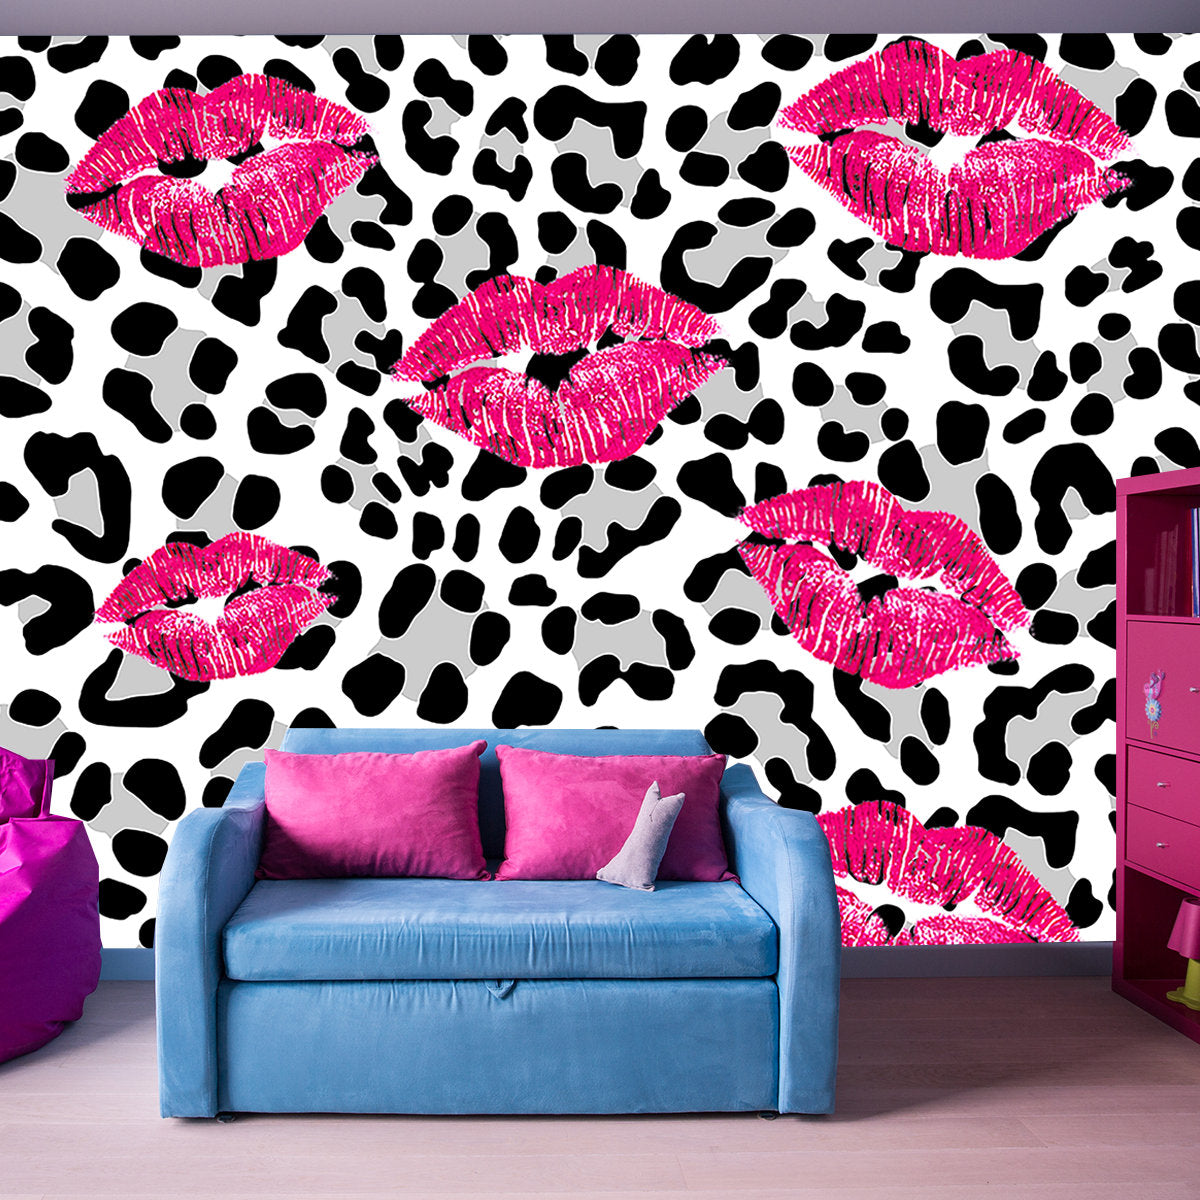 Black and Gray Leopard Print with Pink Kisses Wallpaper Teen Girl Bedroom Mural